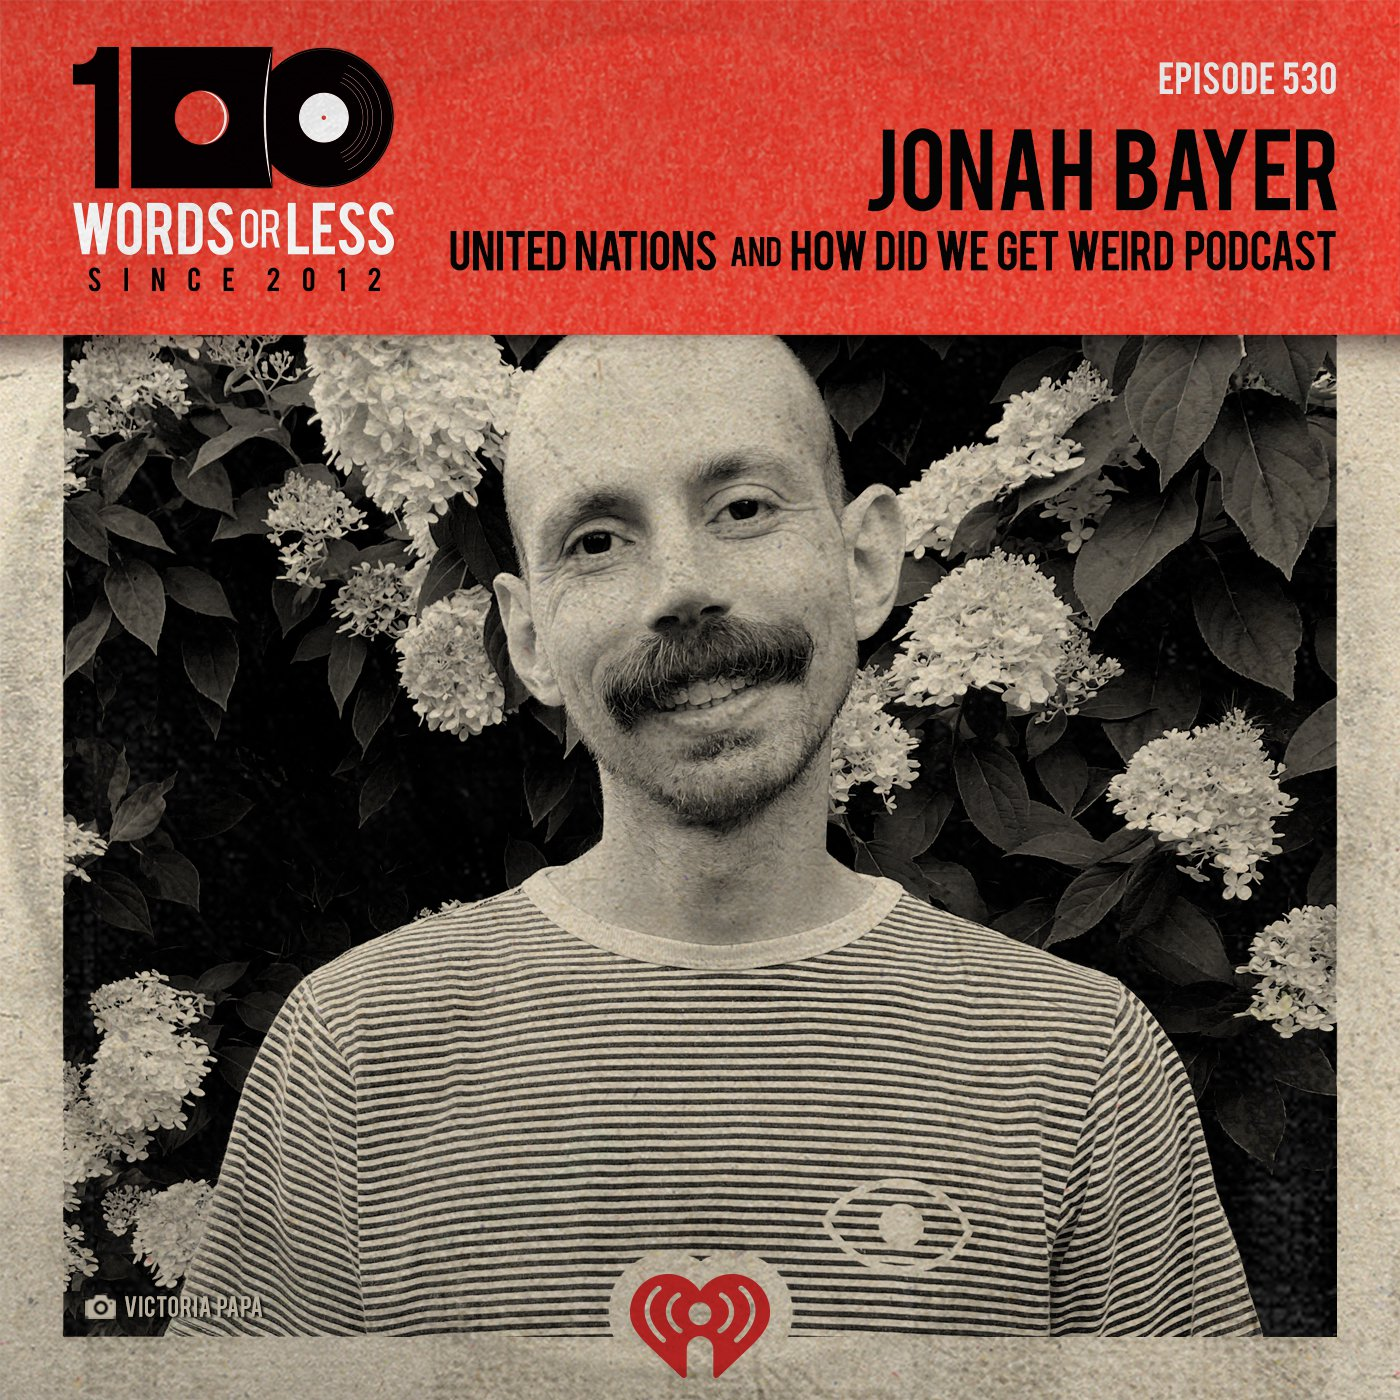 Jonah Bayer from United Nations & How Did We Get Weird Podcast